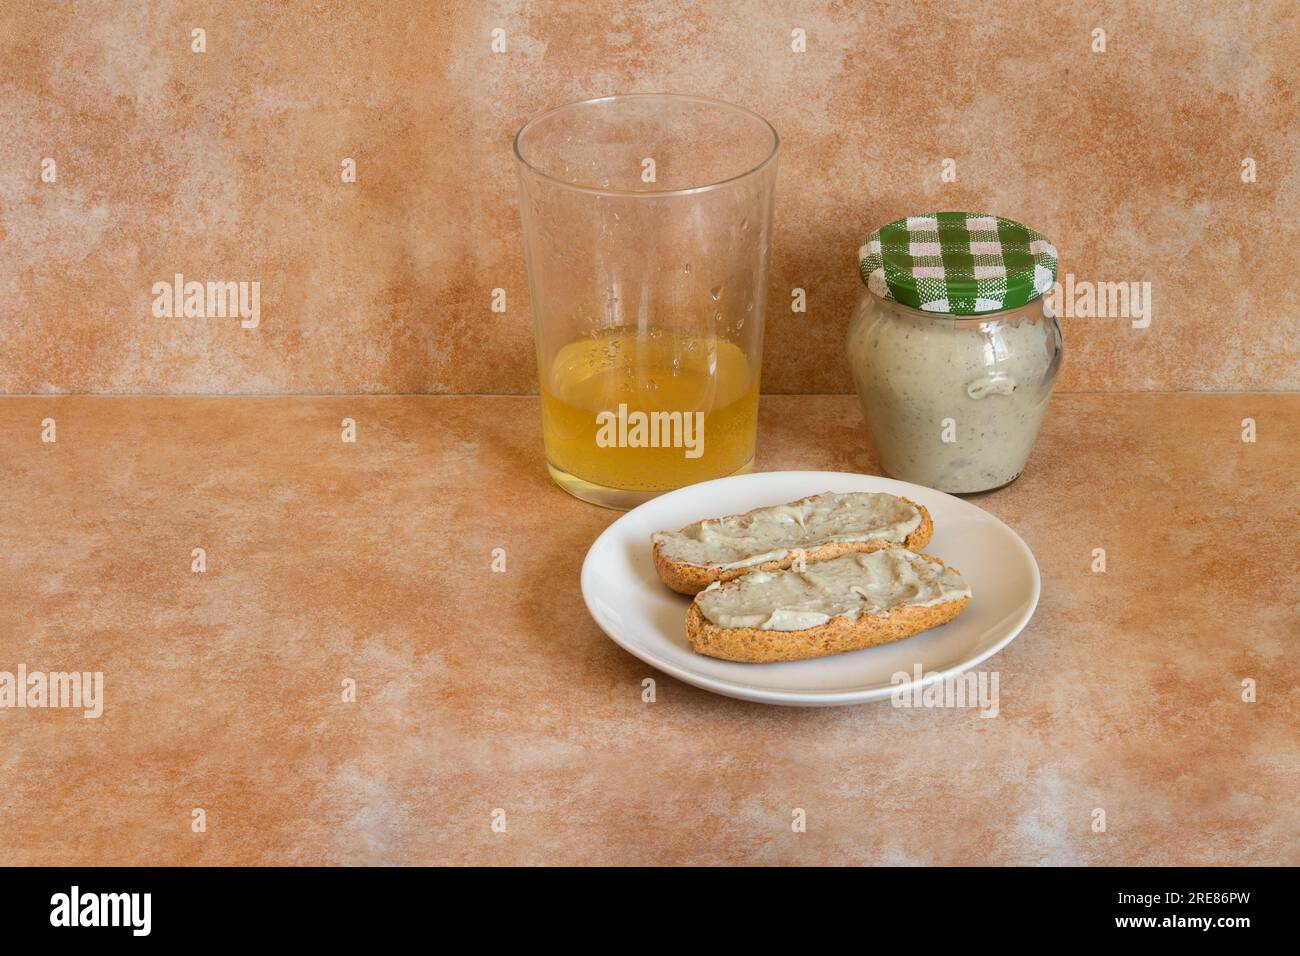 wo toasted wholemeal rolls with cabrales cream and cider on a small plate, accompanied by a glass of cider with a shot and a closed transparent jar of Stock Photo